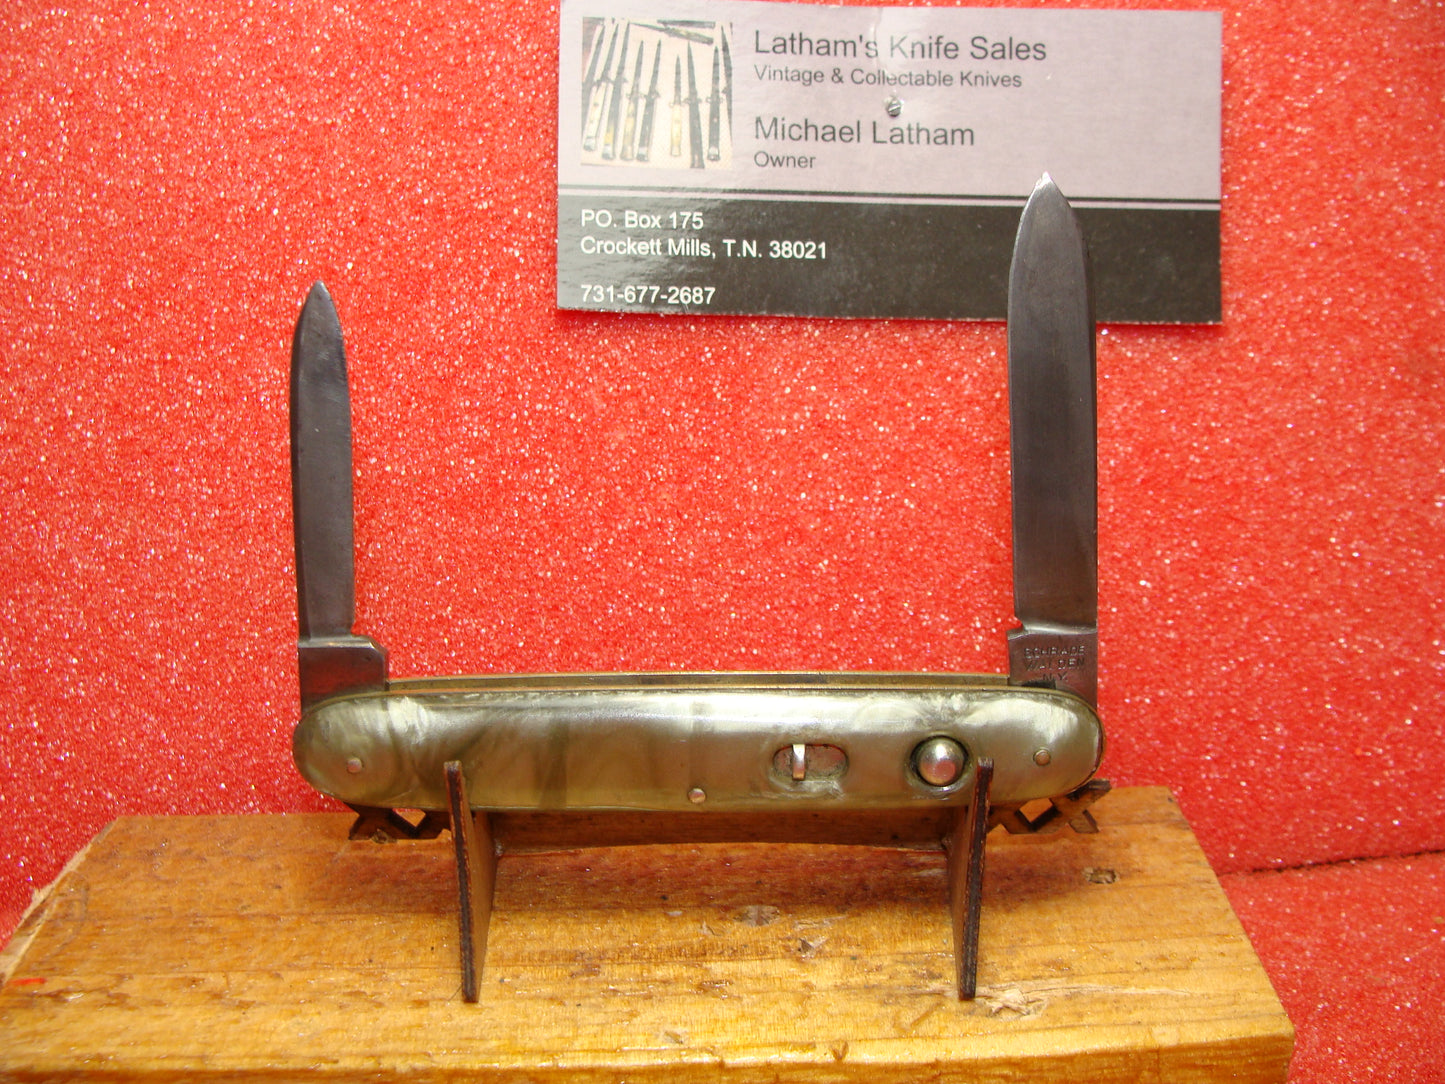 SCHRADE WALDEN NY 1946-49 VINTAGE AMERICAN AUTOMATIC KNIFE 3 3/8" DOUBLE BUTTON GRAY/SILVER COLOR CELLULOID HANDLES